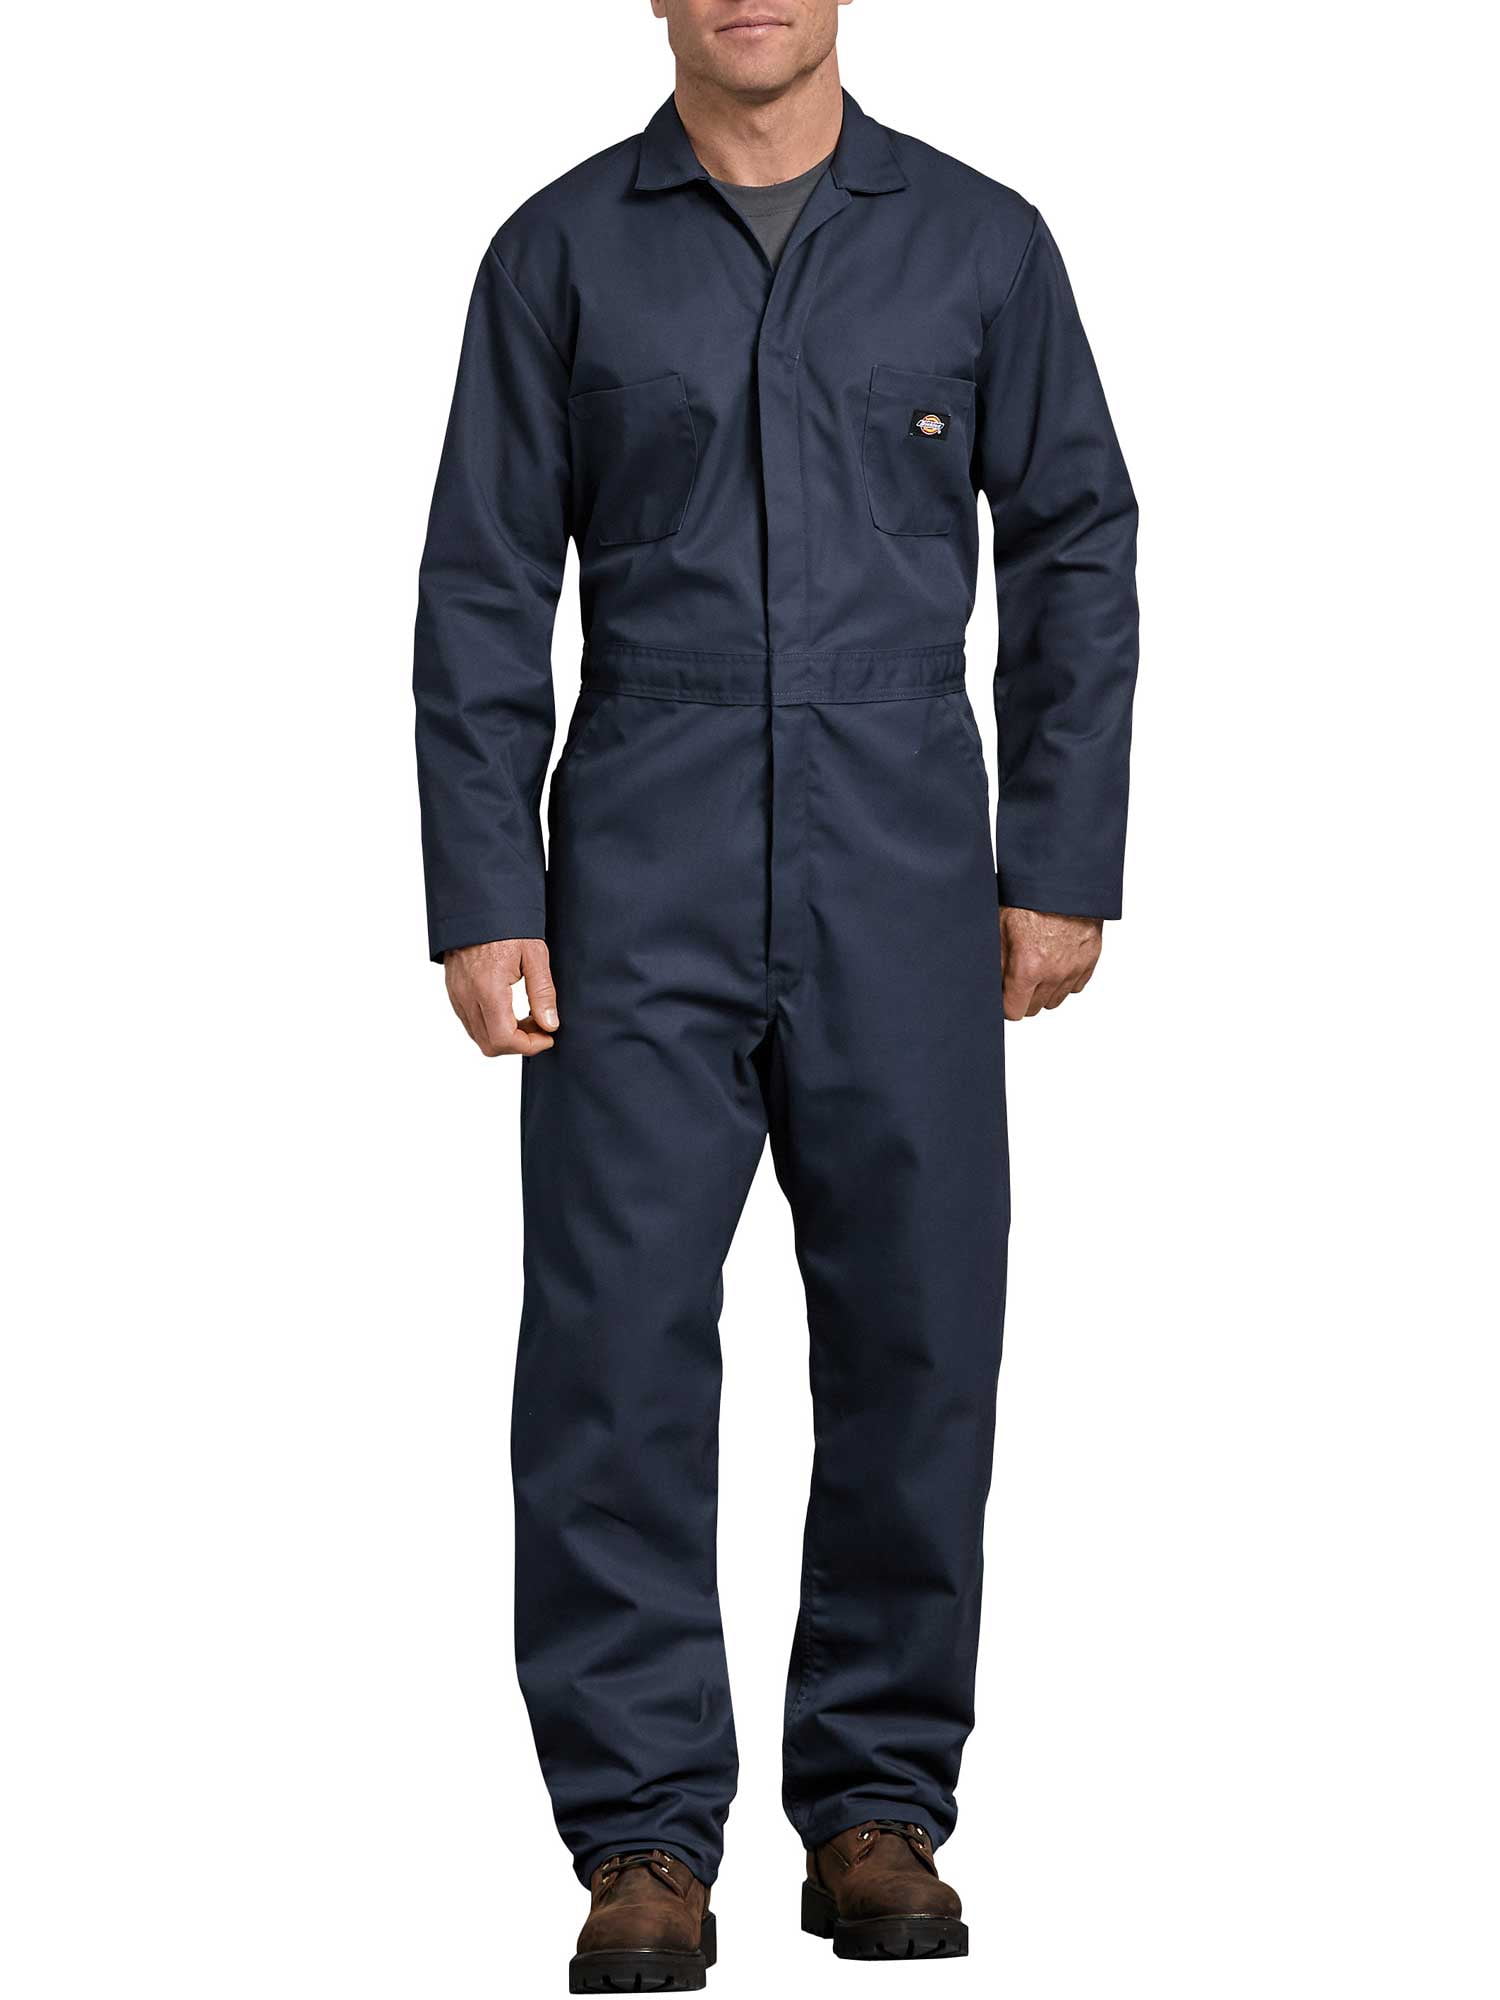 New DICKIES Long Sleeve Coveralls F50F Navy Cotton 